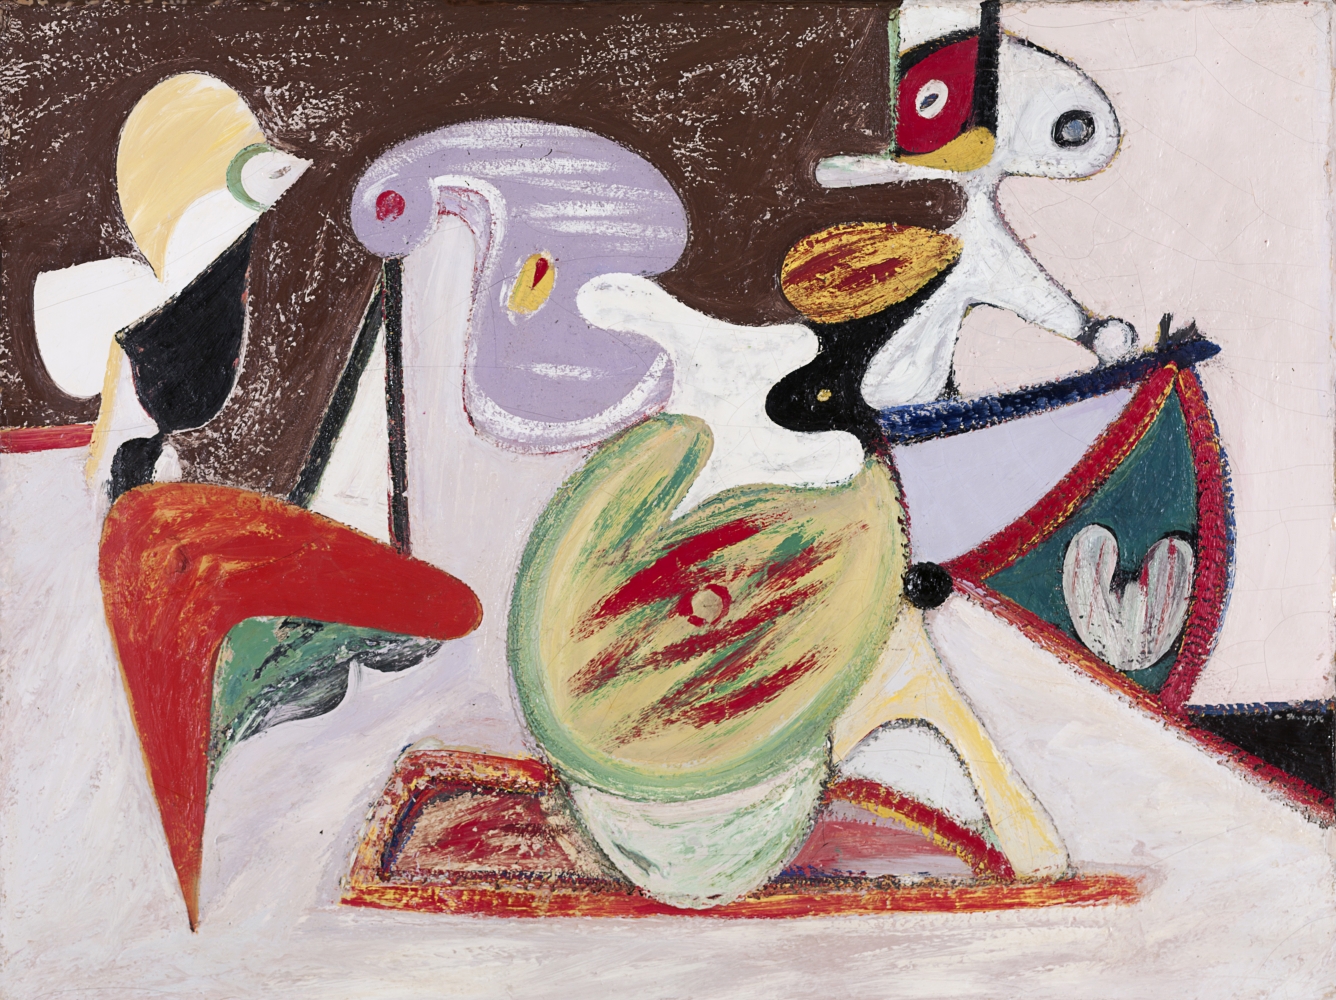 Xhorkom, 1936, oil on canvas, 36 x 48 in. (91.4 x 121.9 cm). Collection Albright-Knox Art Gallery, Buffalo, New York; Sarah Norton Goodyear Fund and Partial Gift of David K. Anderson to the Martha Jackson Collection at the Albright-Knox Art Gallery, 1999 (1999:8). Image courtesy Albright-Knox Art Gallery. Photograph by Tom Loonan and Brenda Bieger.&nbsp;[AGCR: P148]